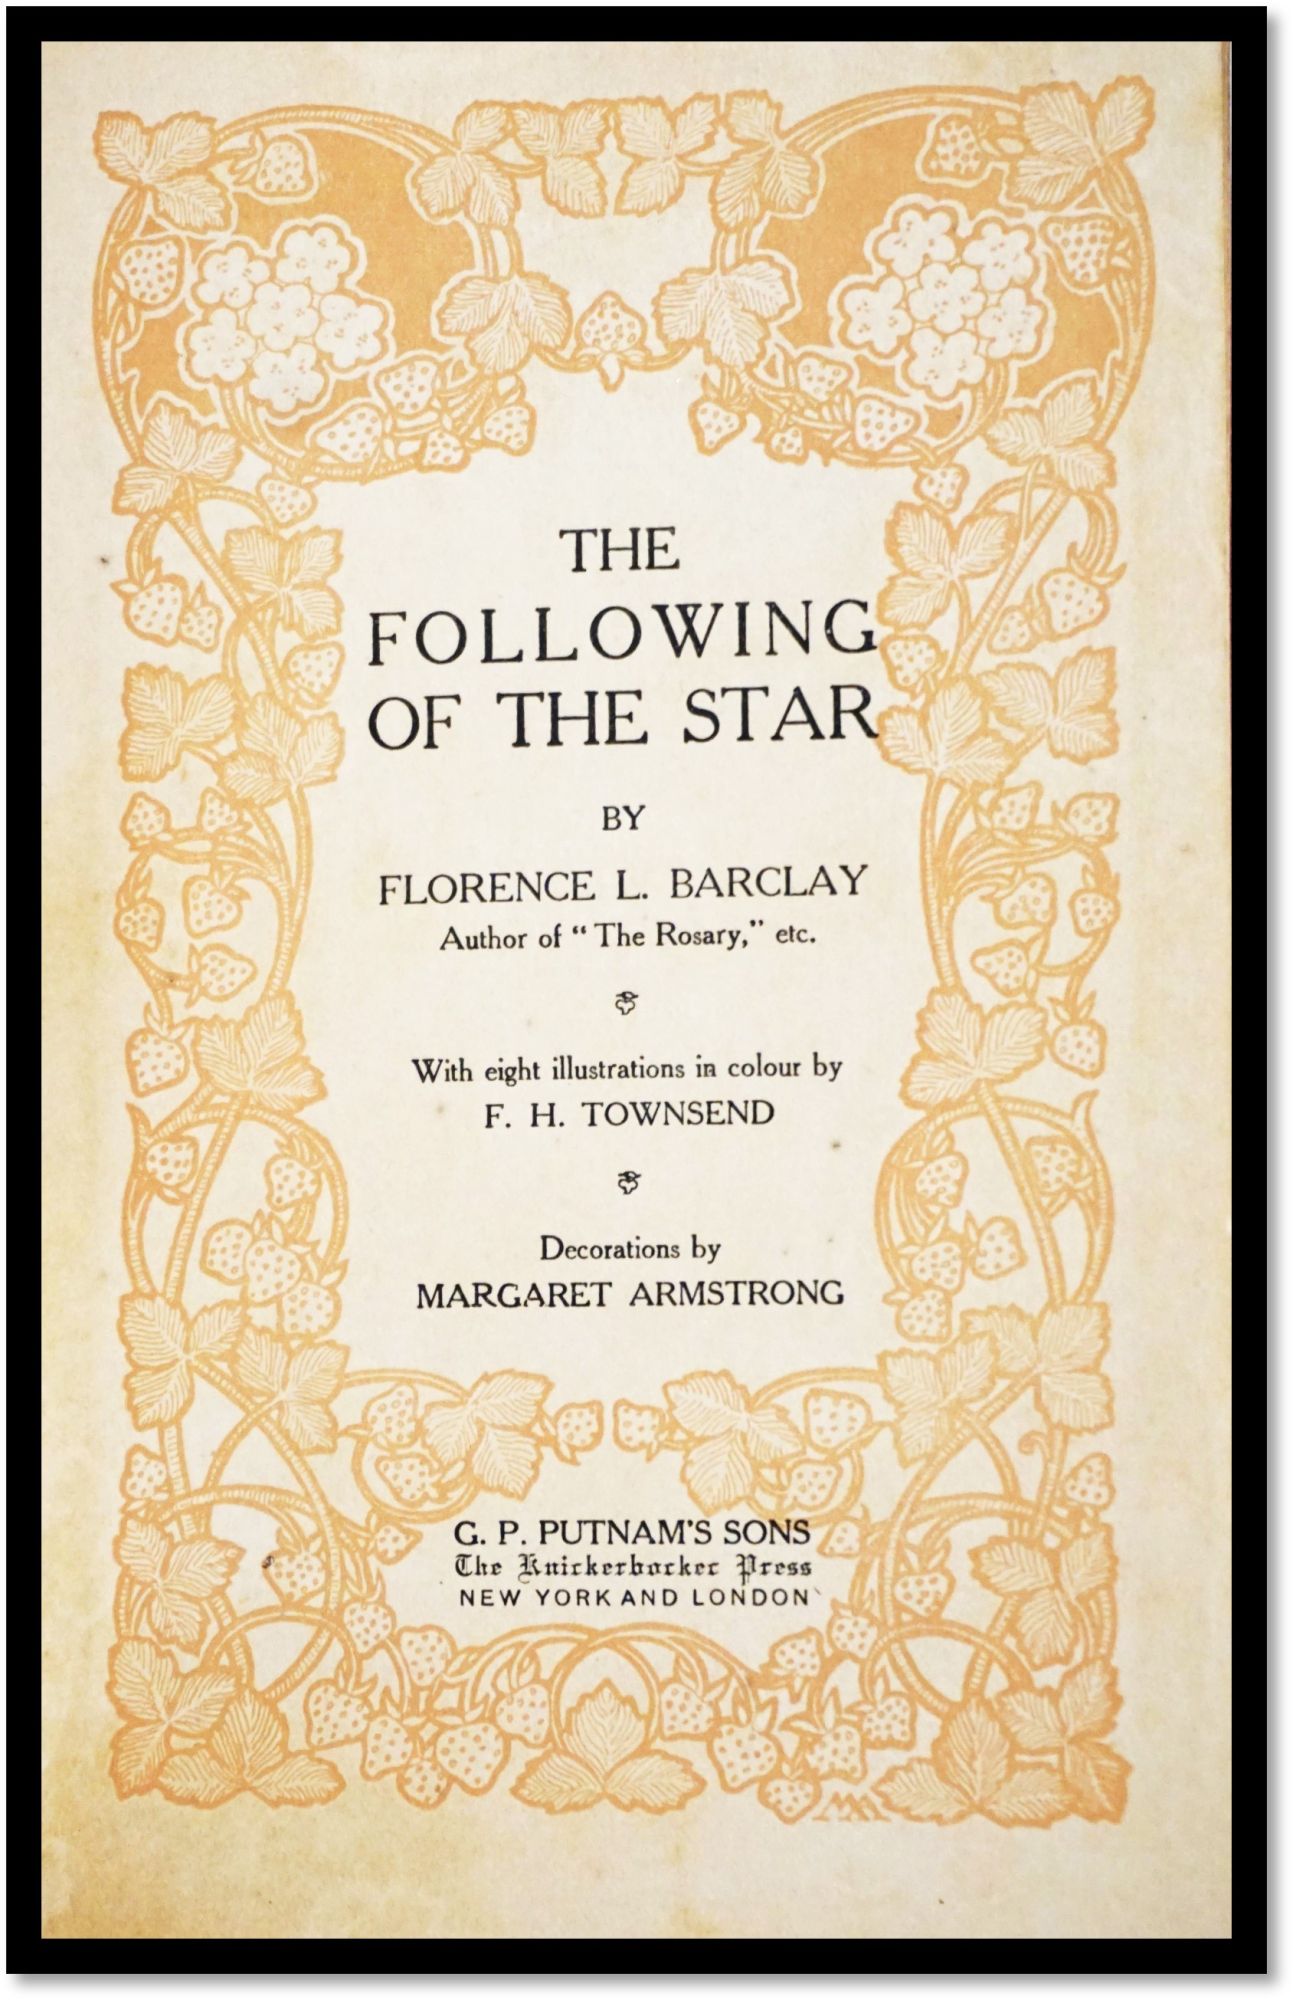 The Following of the Star. A Romance [Margaret Armstrong]